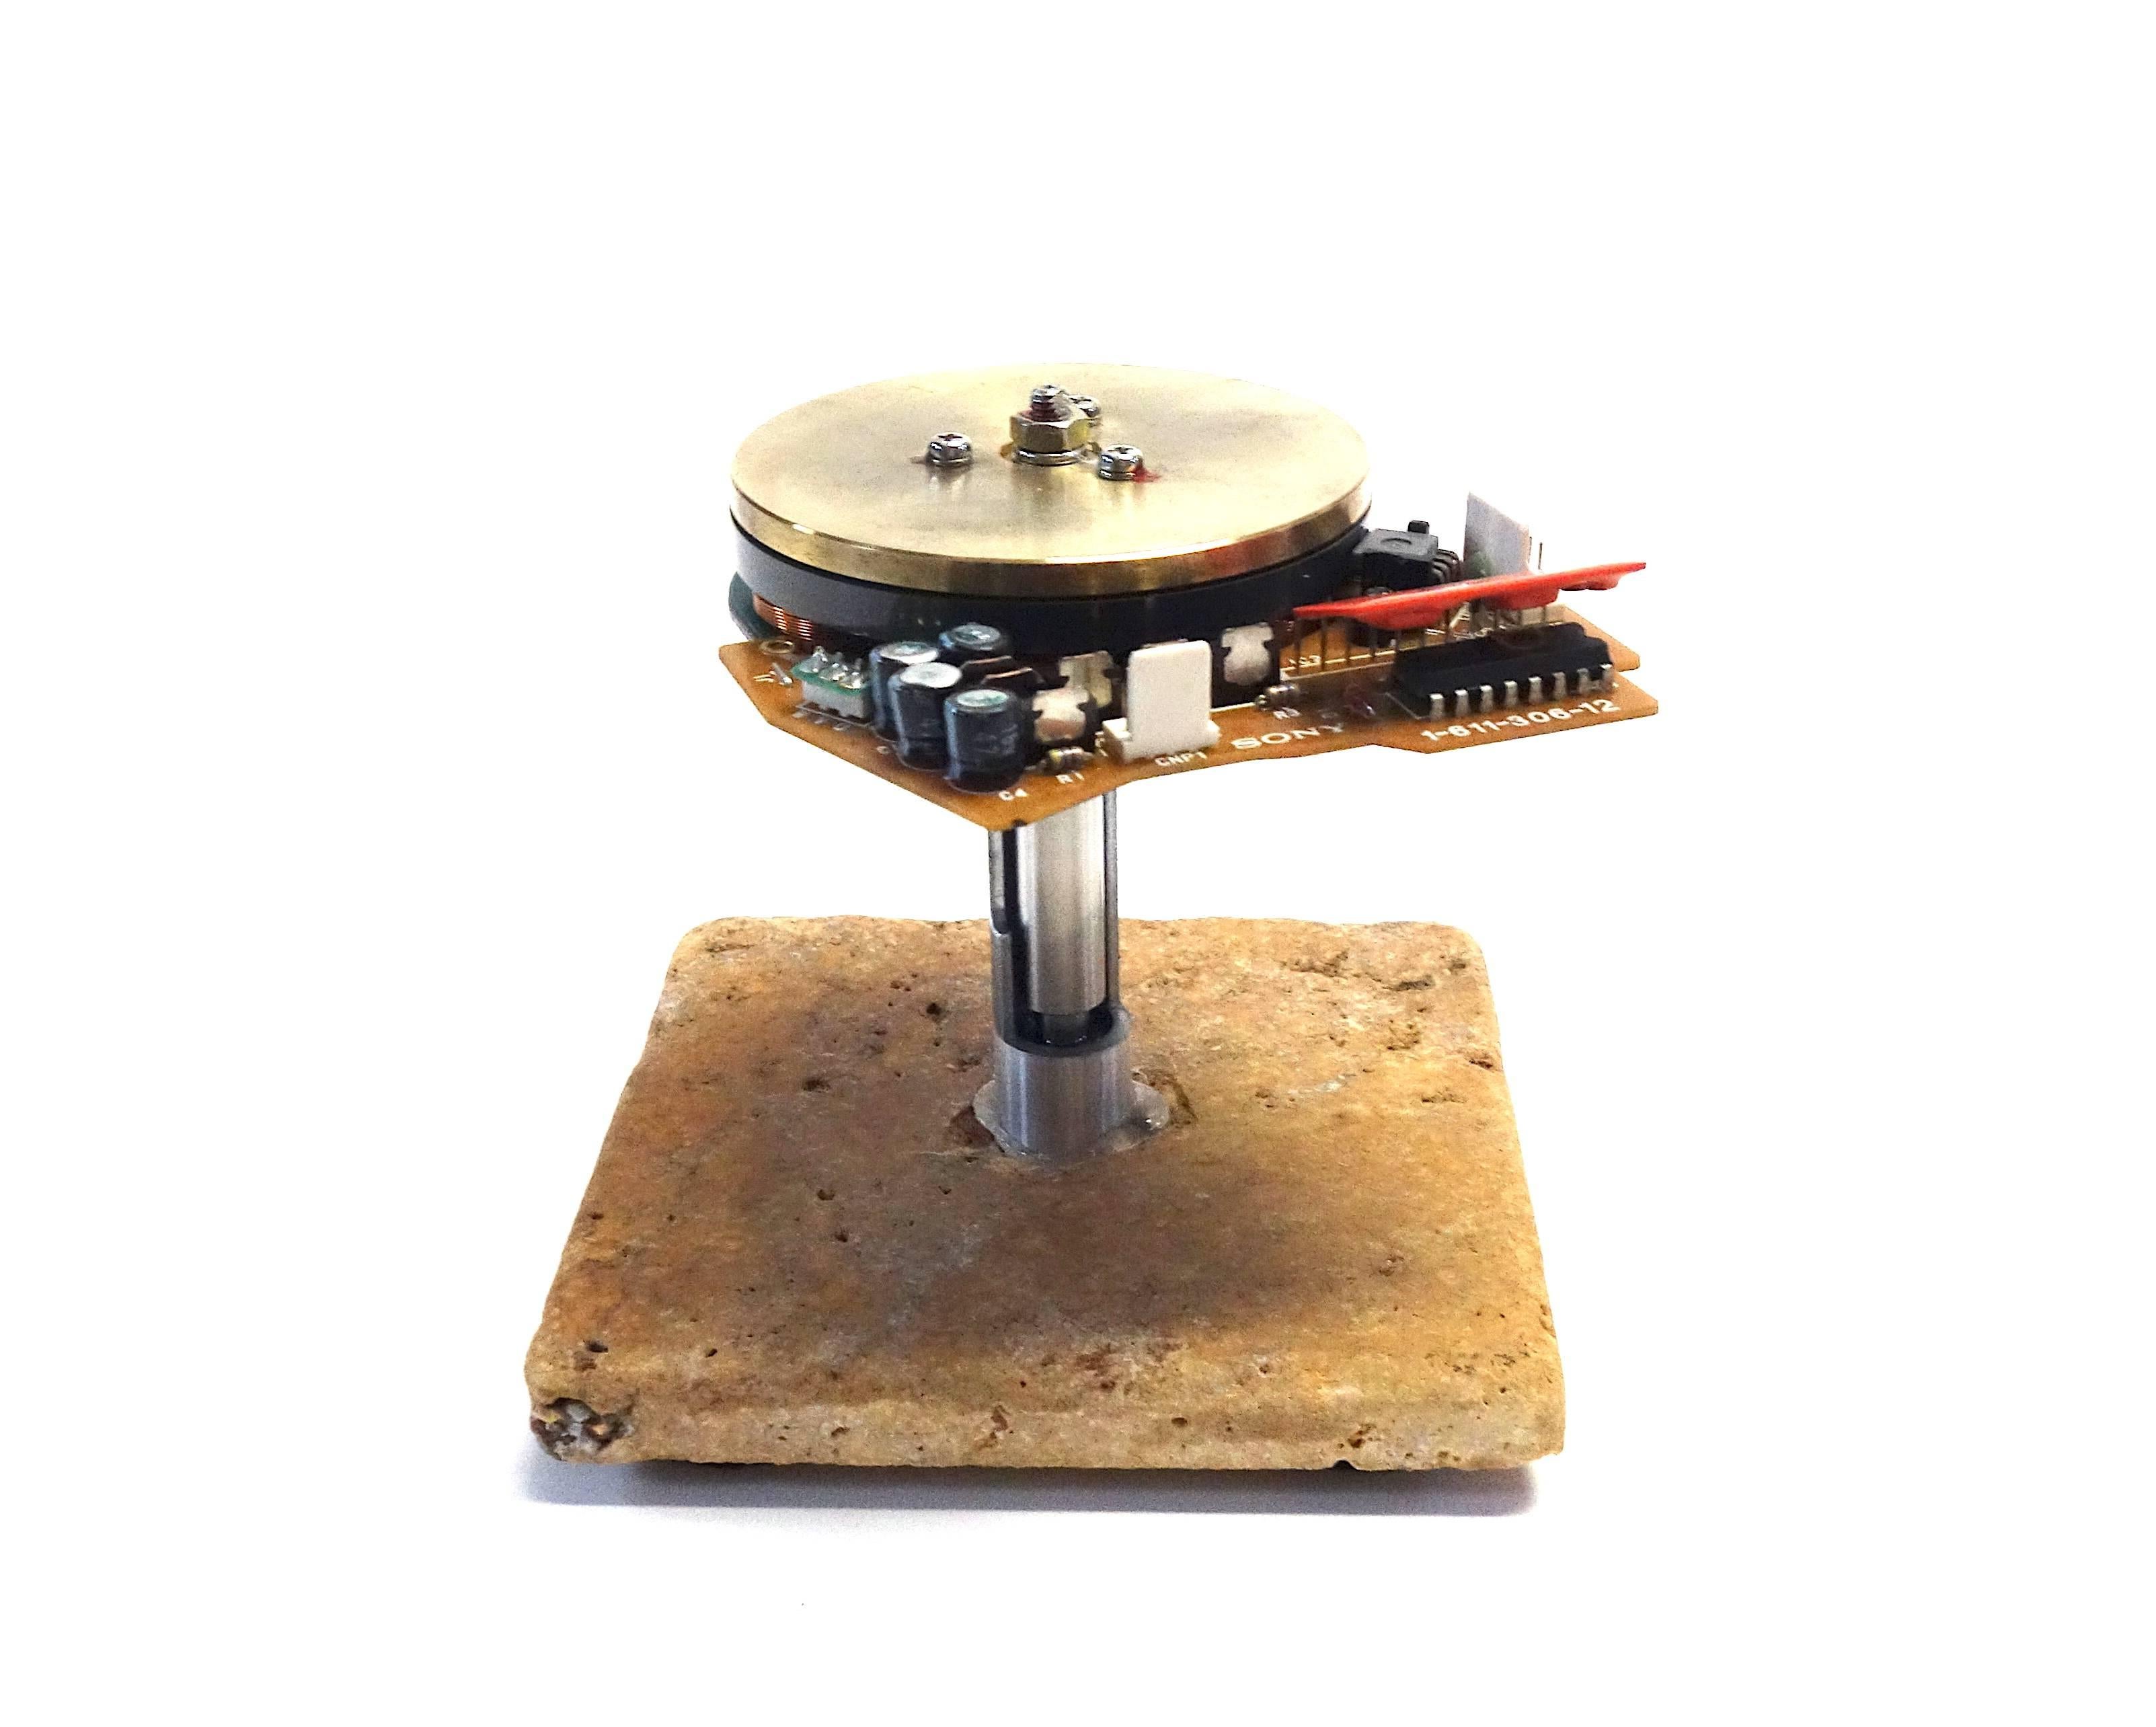 Industrial Mid-20th Century TV Component Sculpture #Bx1008 On Stone.  ON SALE For Sale